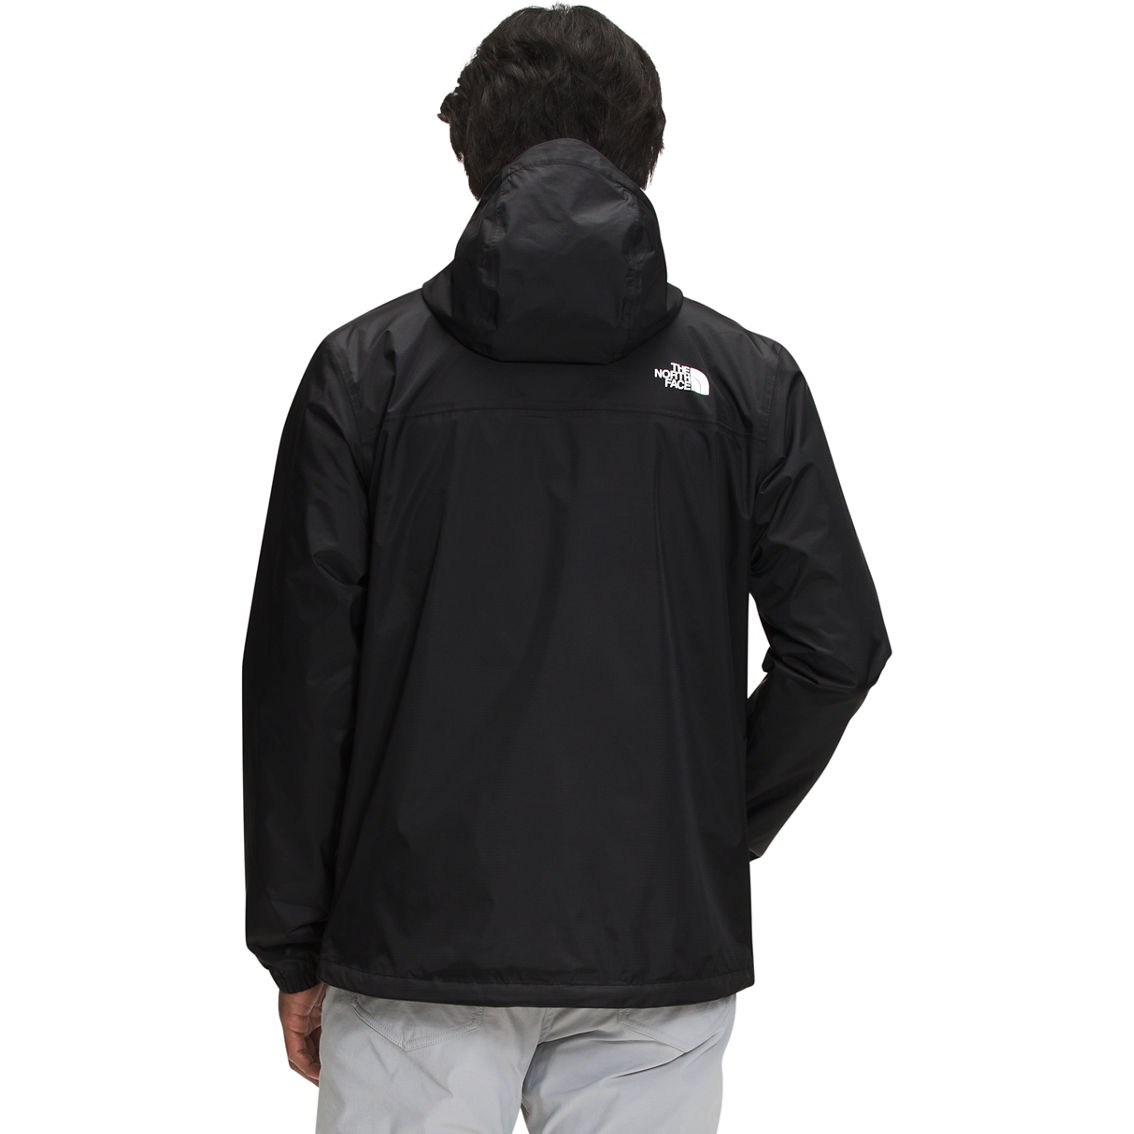 The  North Face Men's Antora Jacket - Image 2 of 4